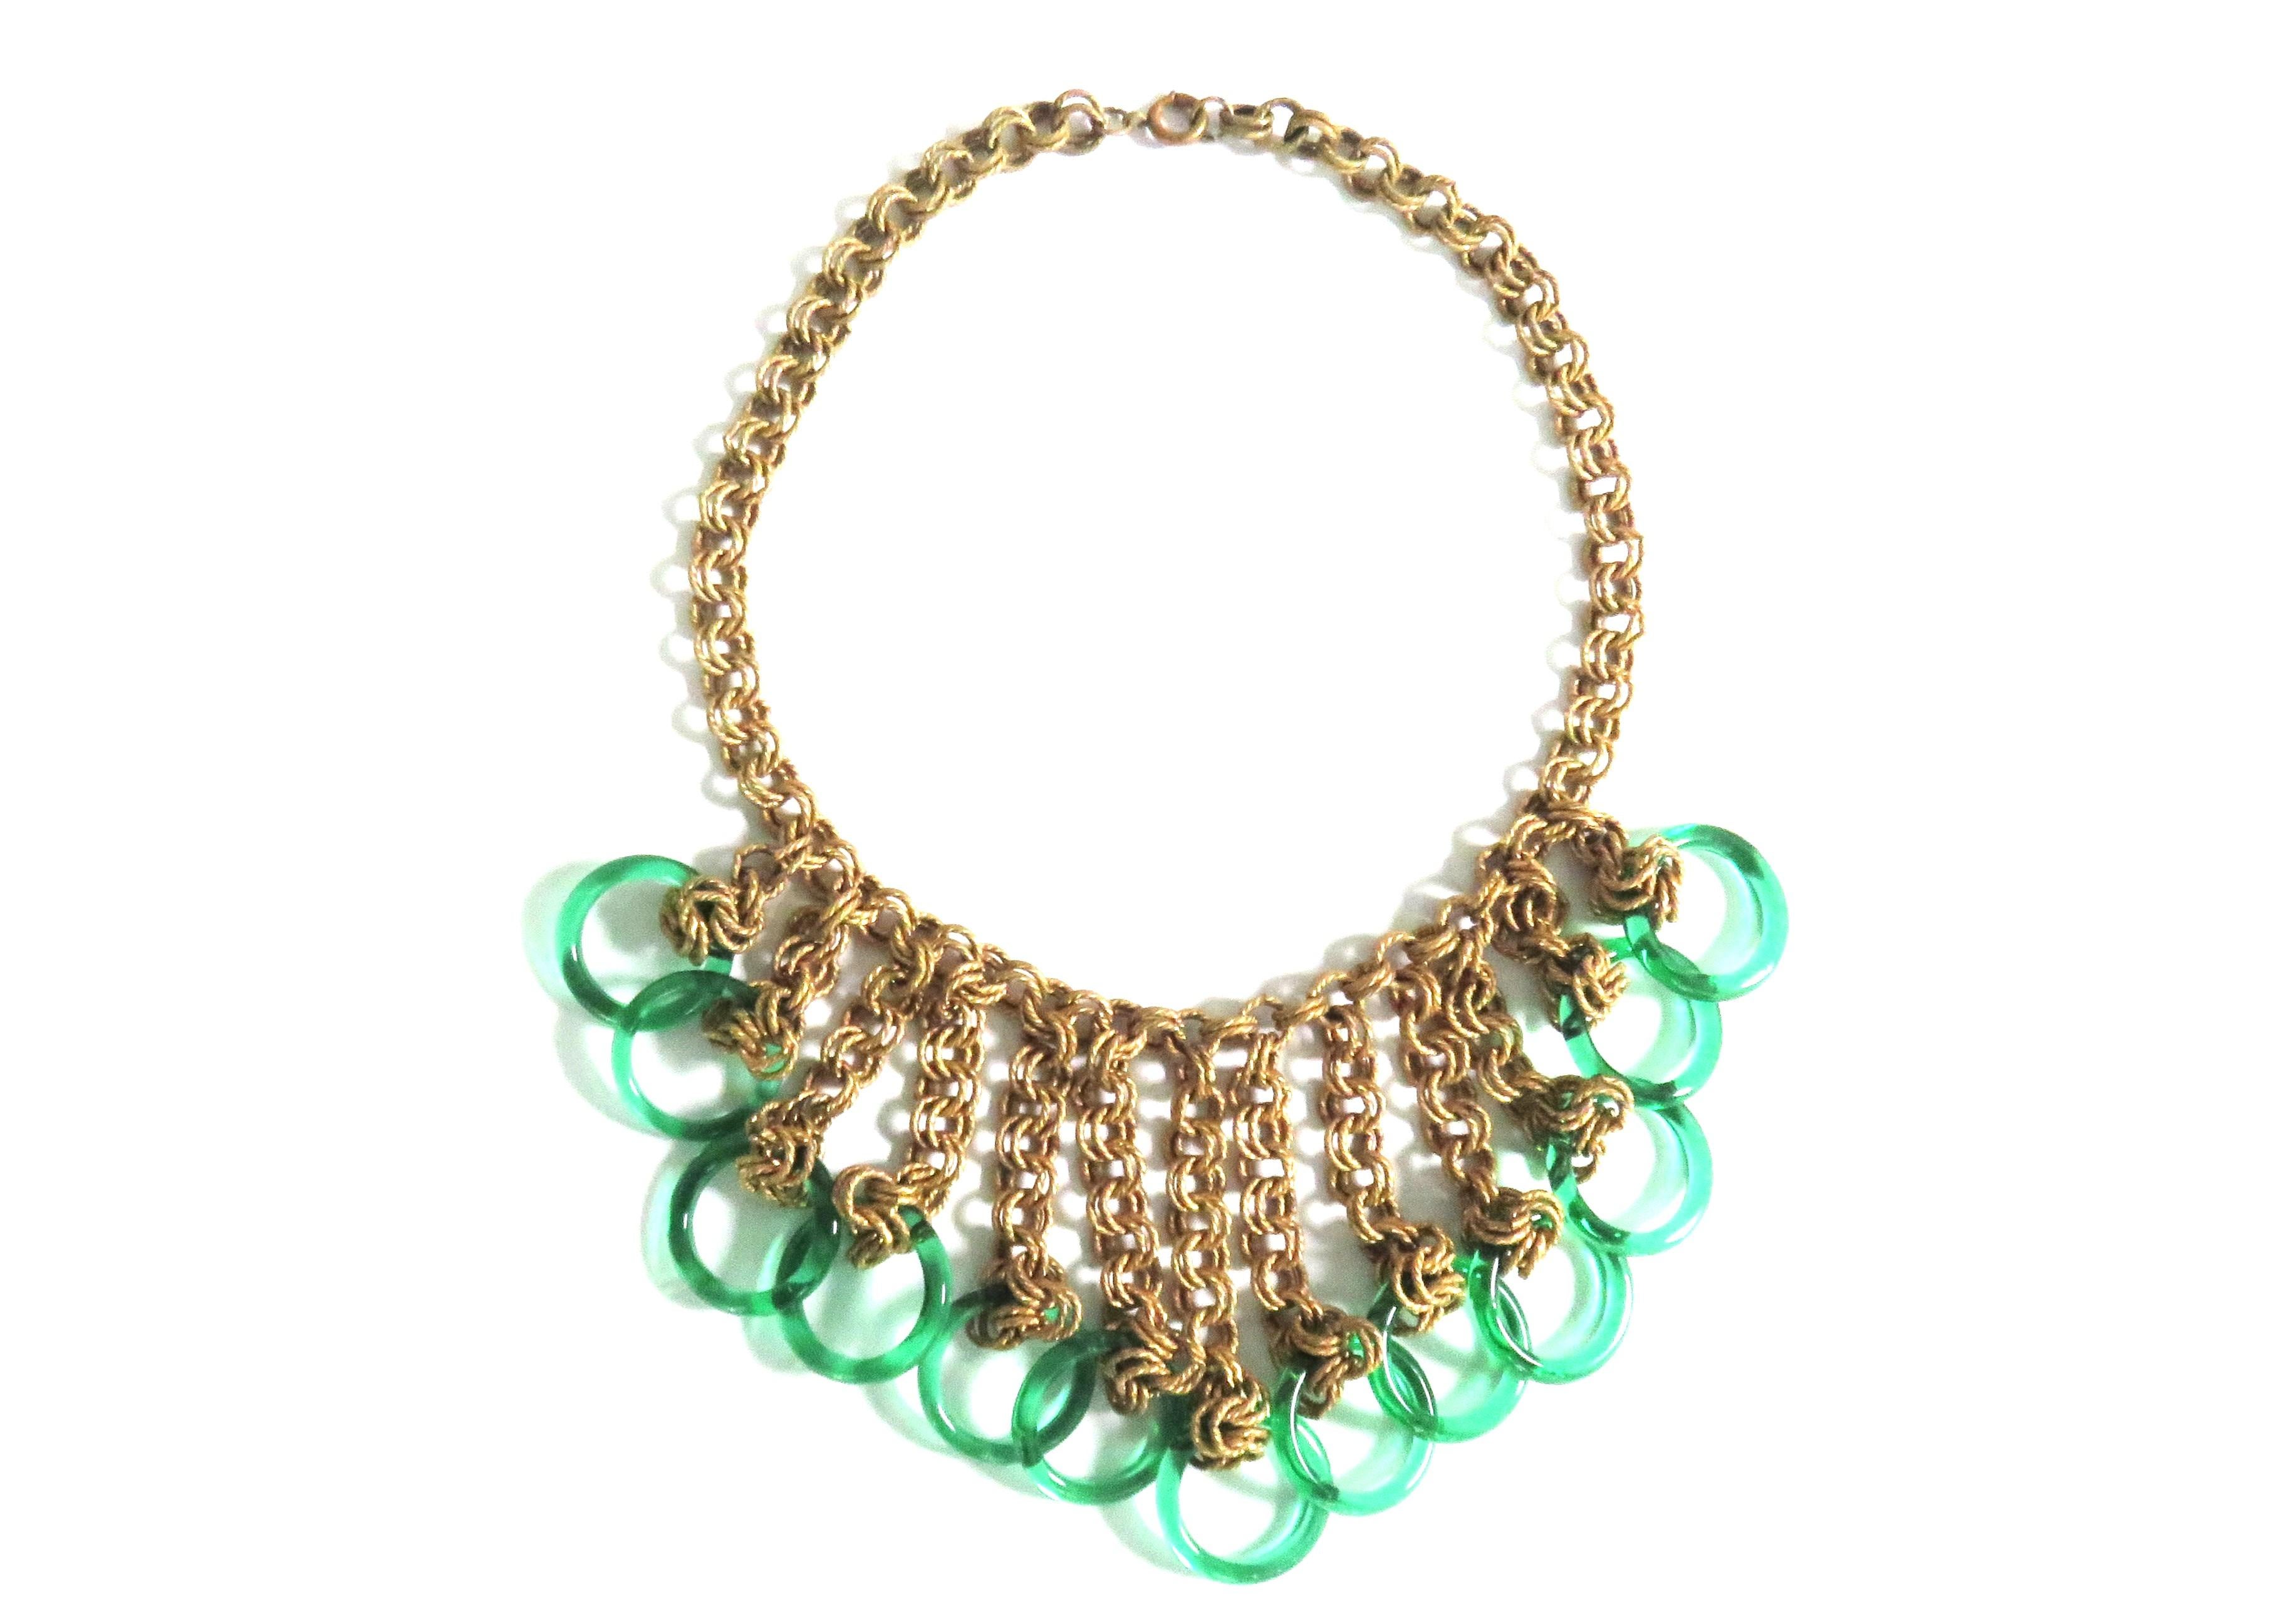 Chain Bib 1940s Necklace with Green Glass Circles For Sale 5